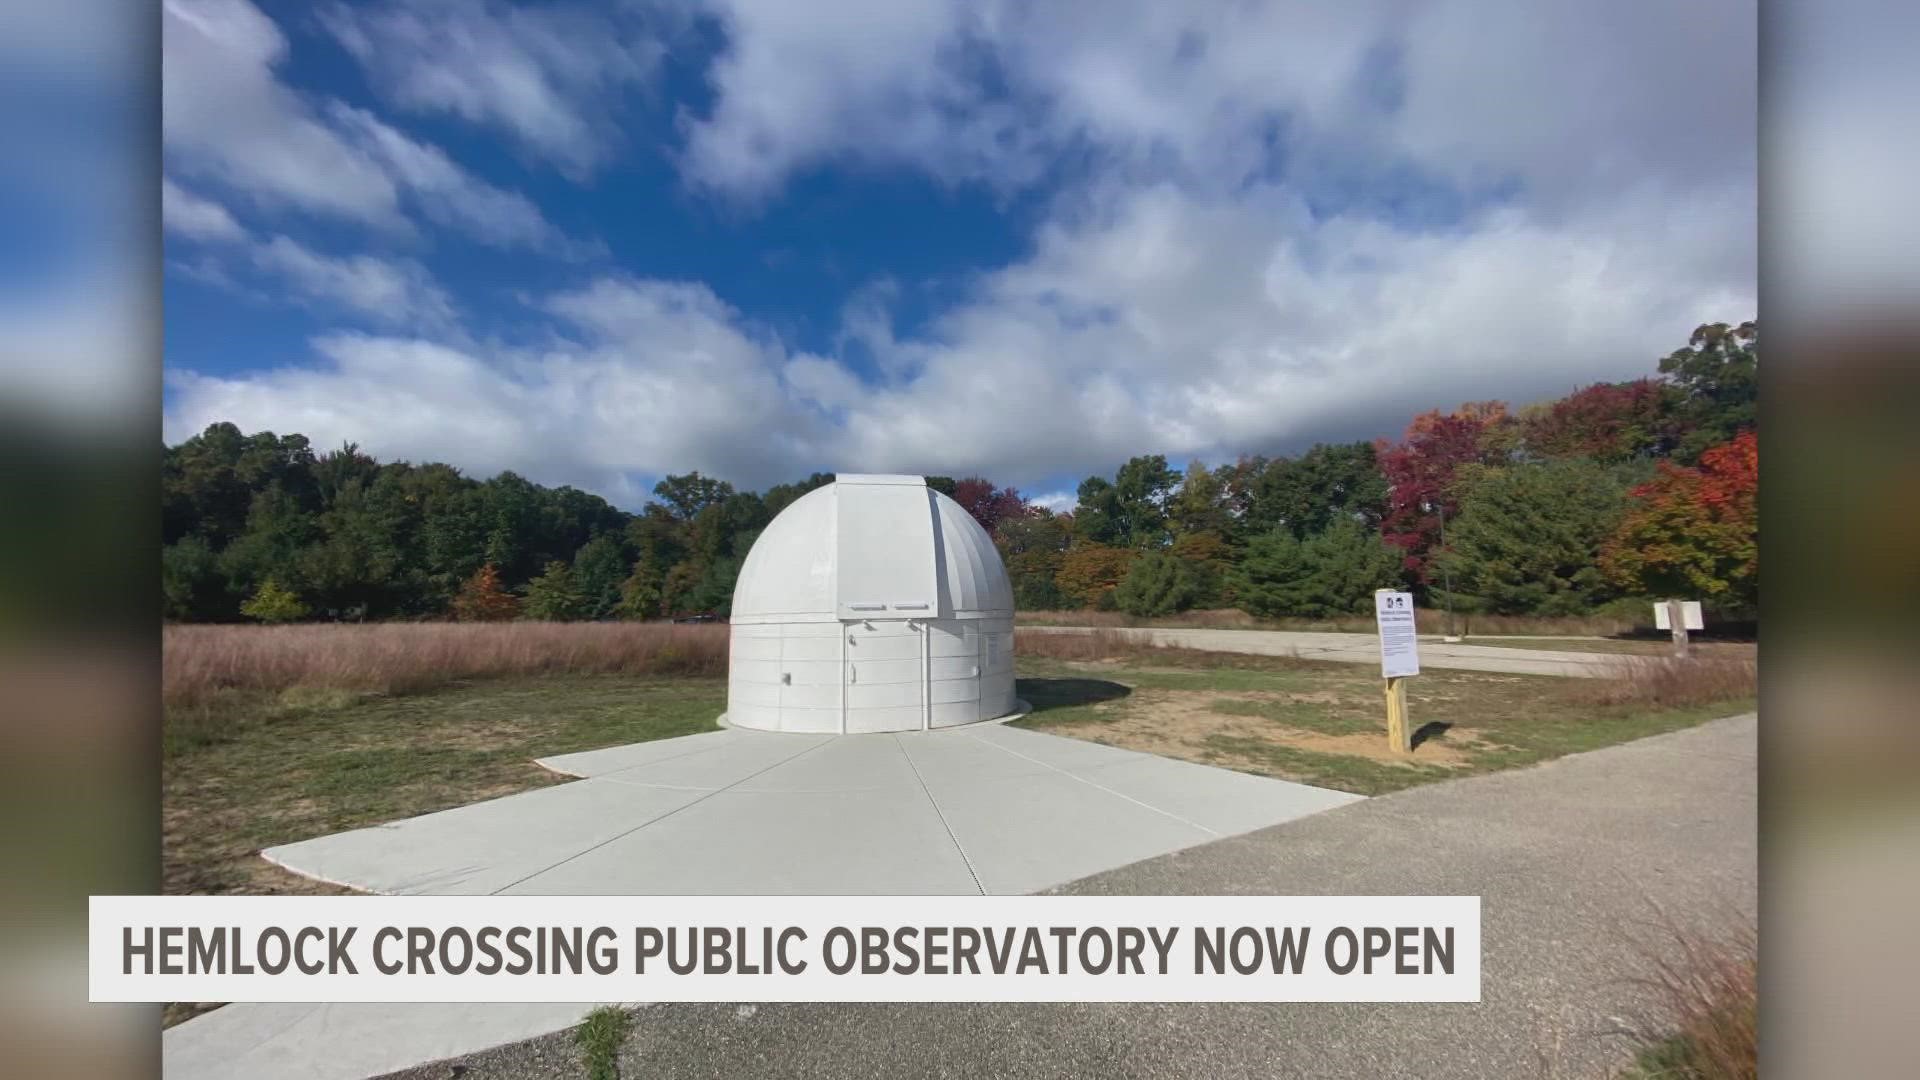 10 years in the making, the Hemlock Crossing Public Observatory became the first observatory open to the public in West Michigan this weekend.